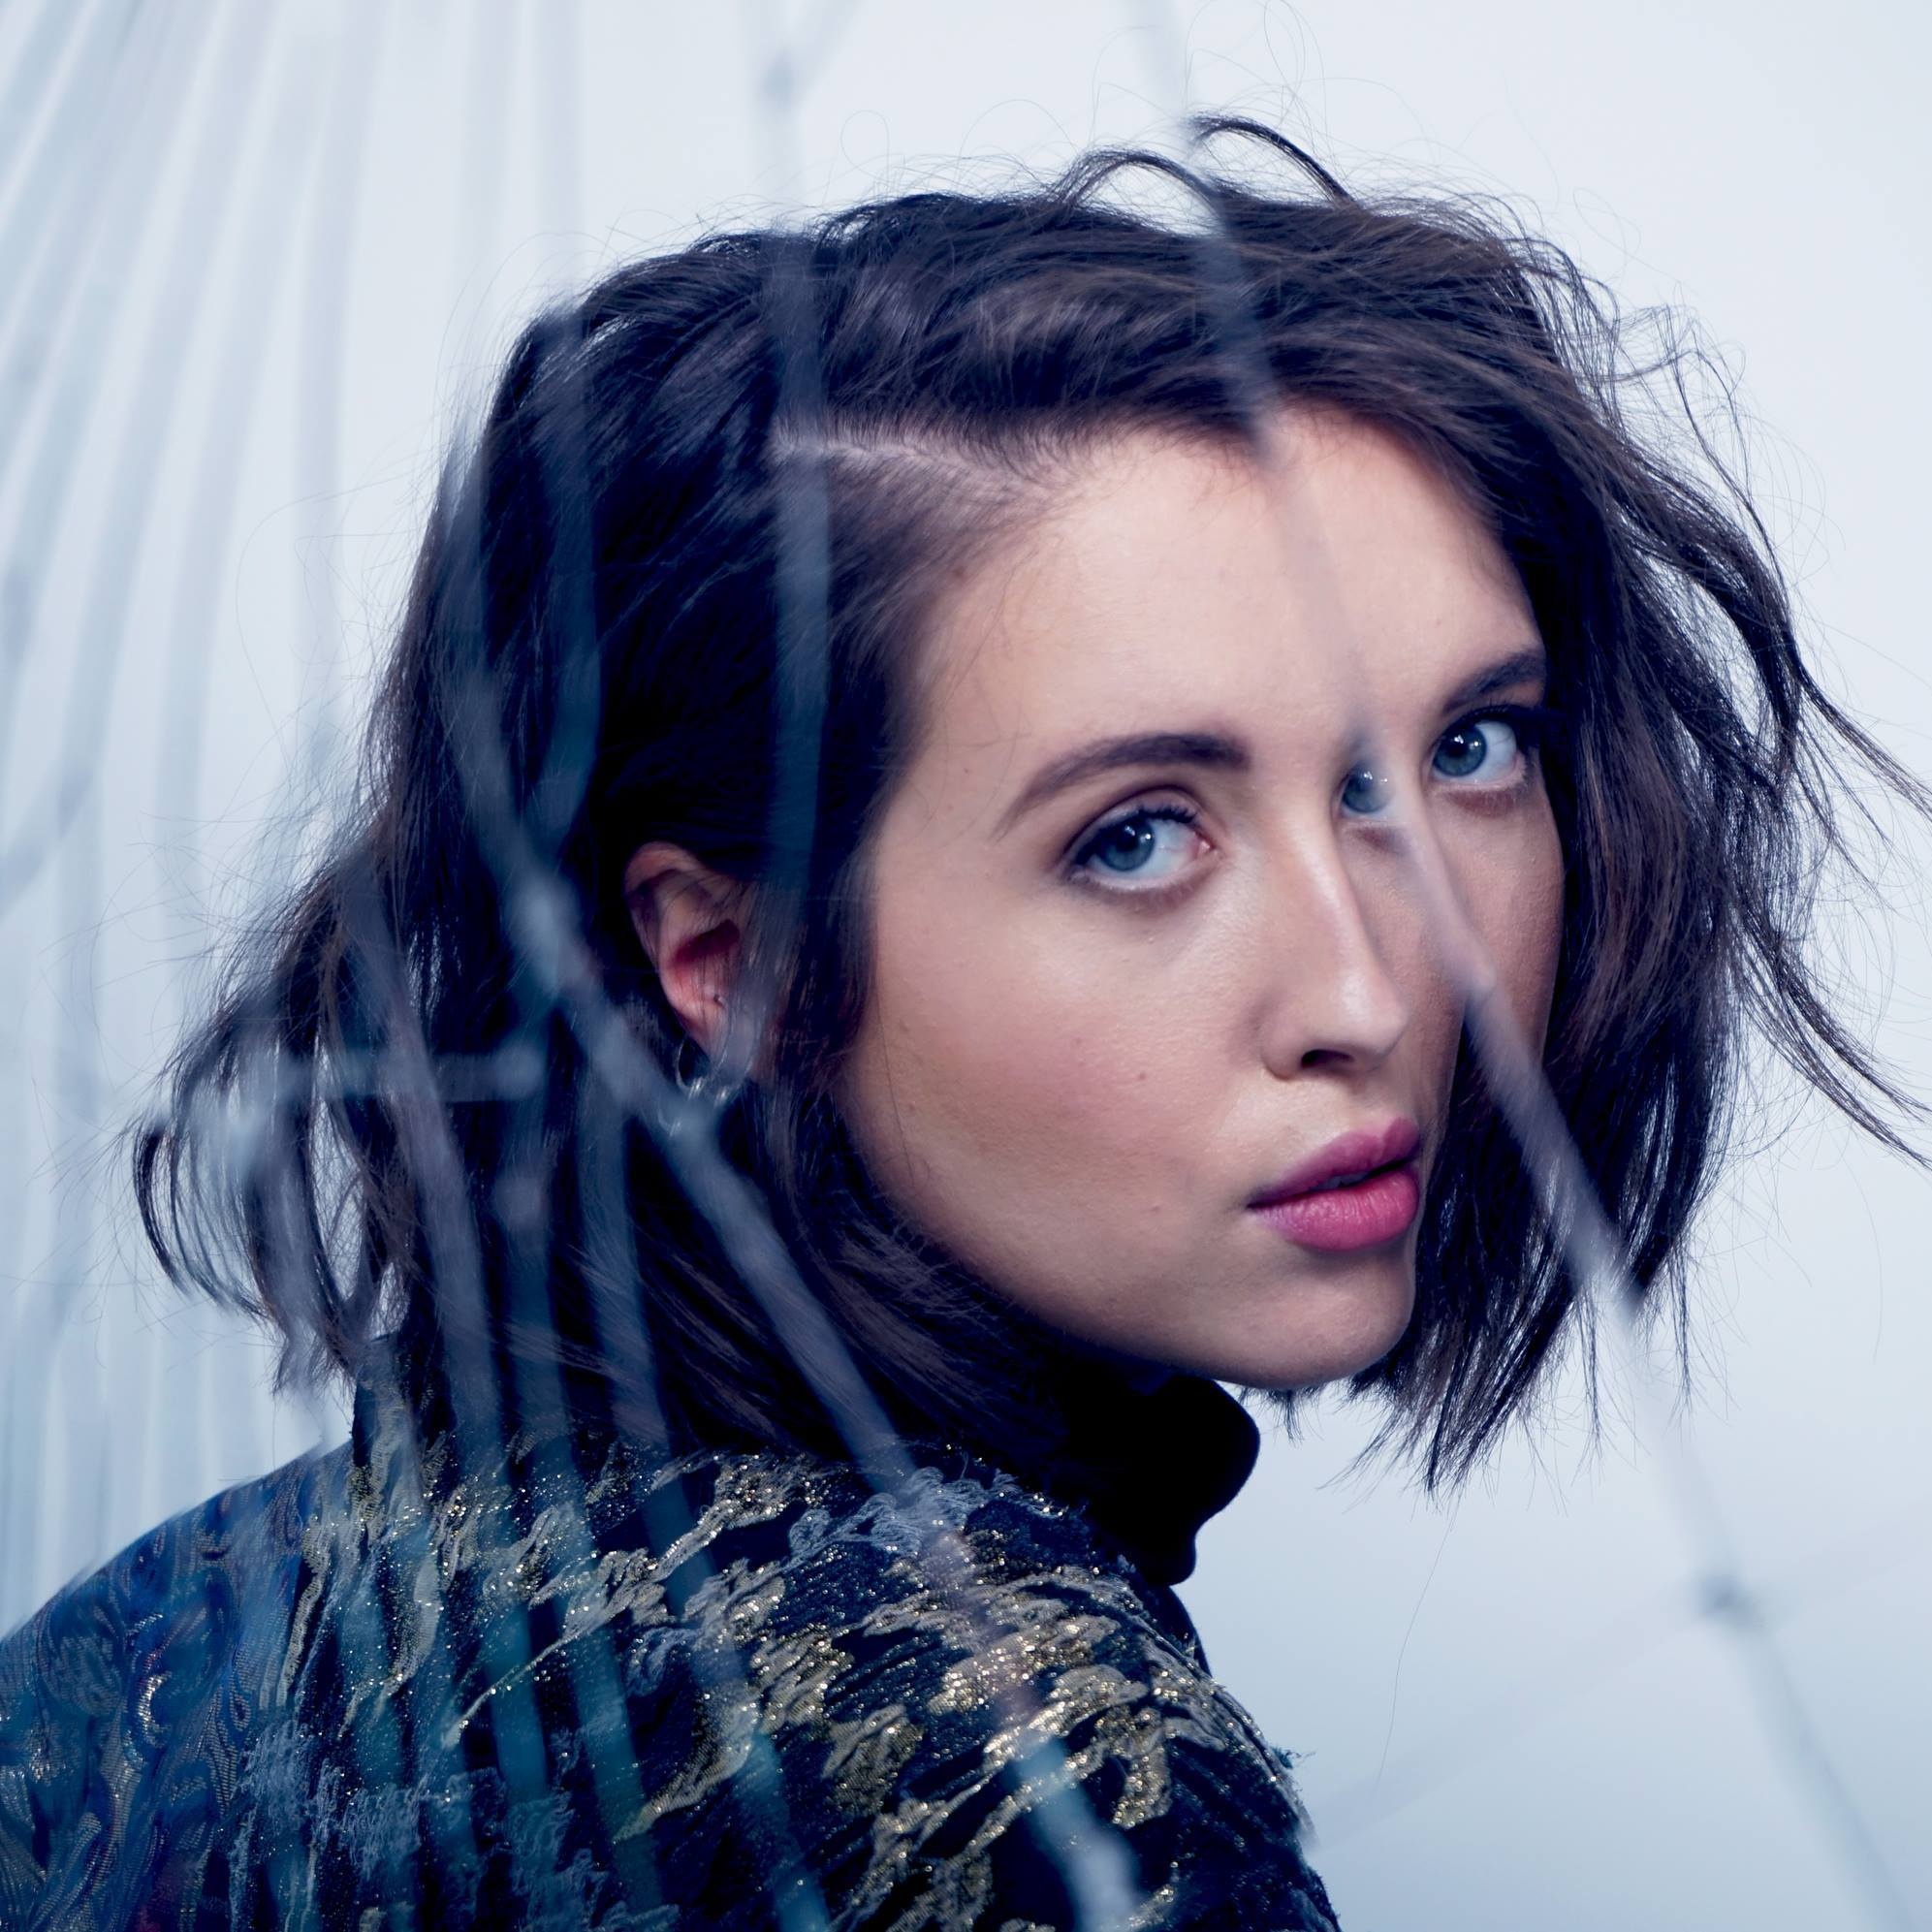 Alice Merton tour tickets, 2022-2023, Live concert information, Must-see performances, 2000x2000 HD Handy